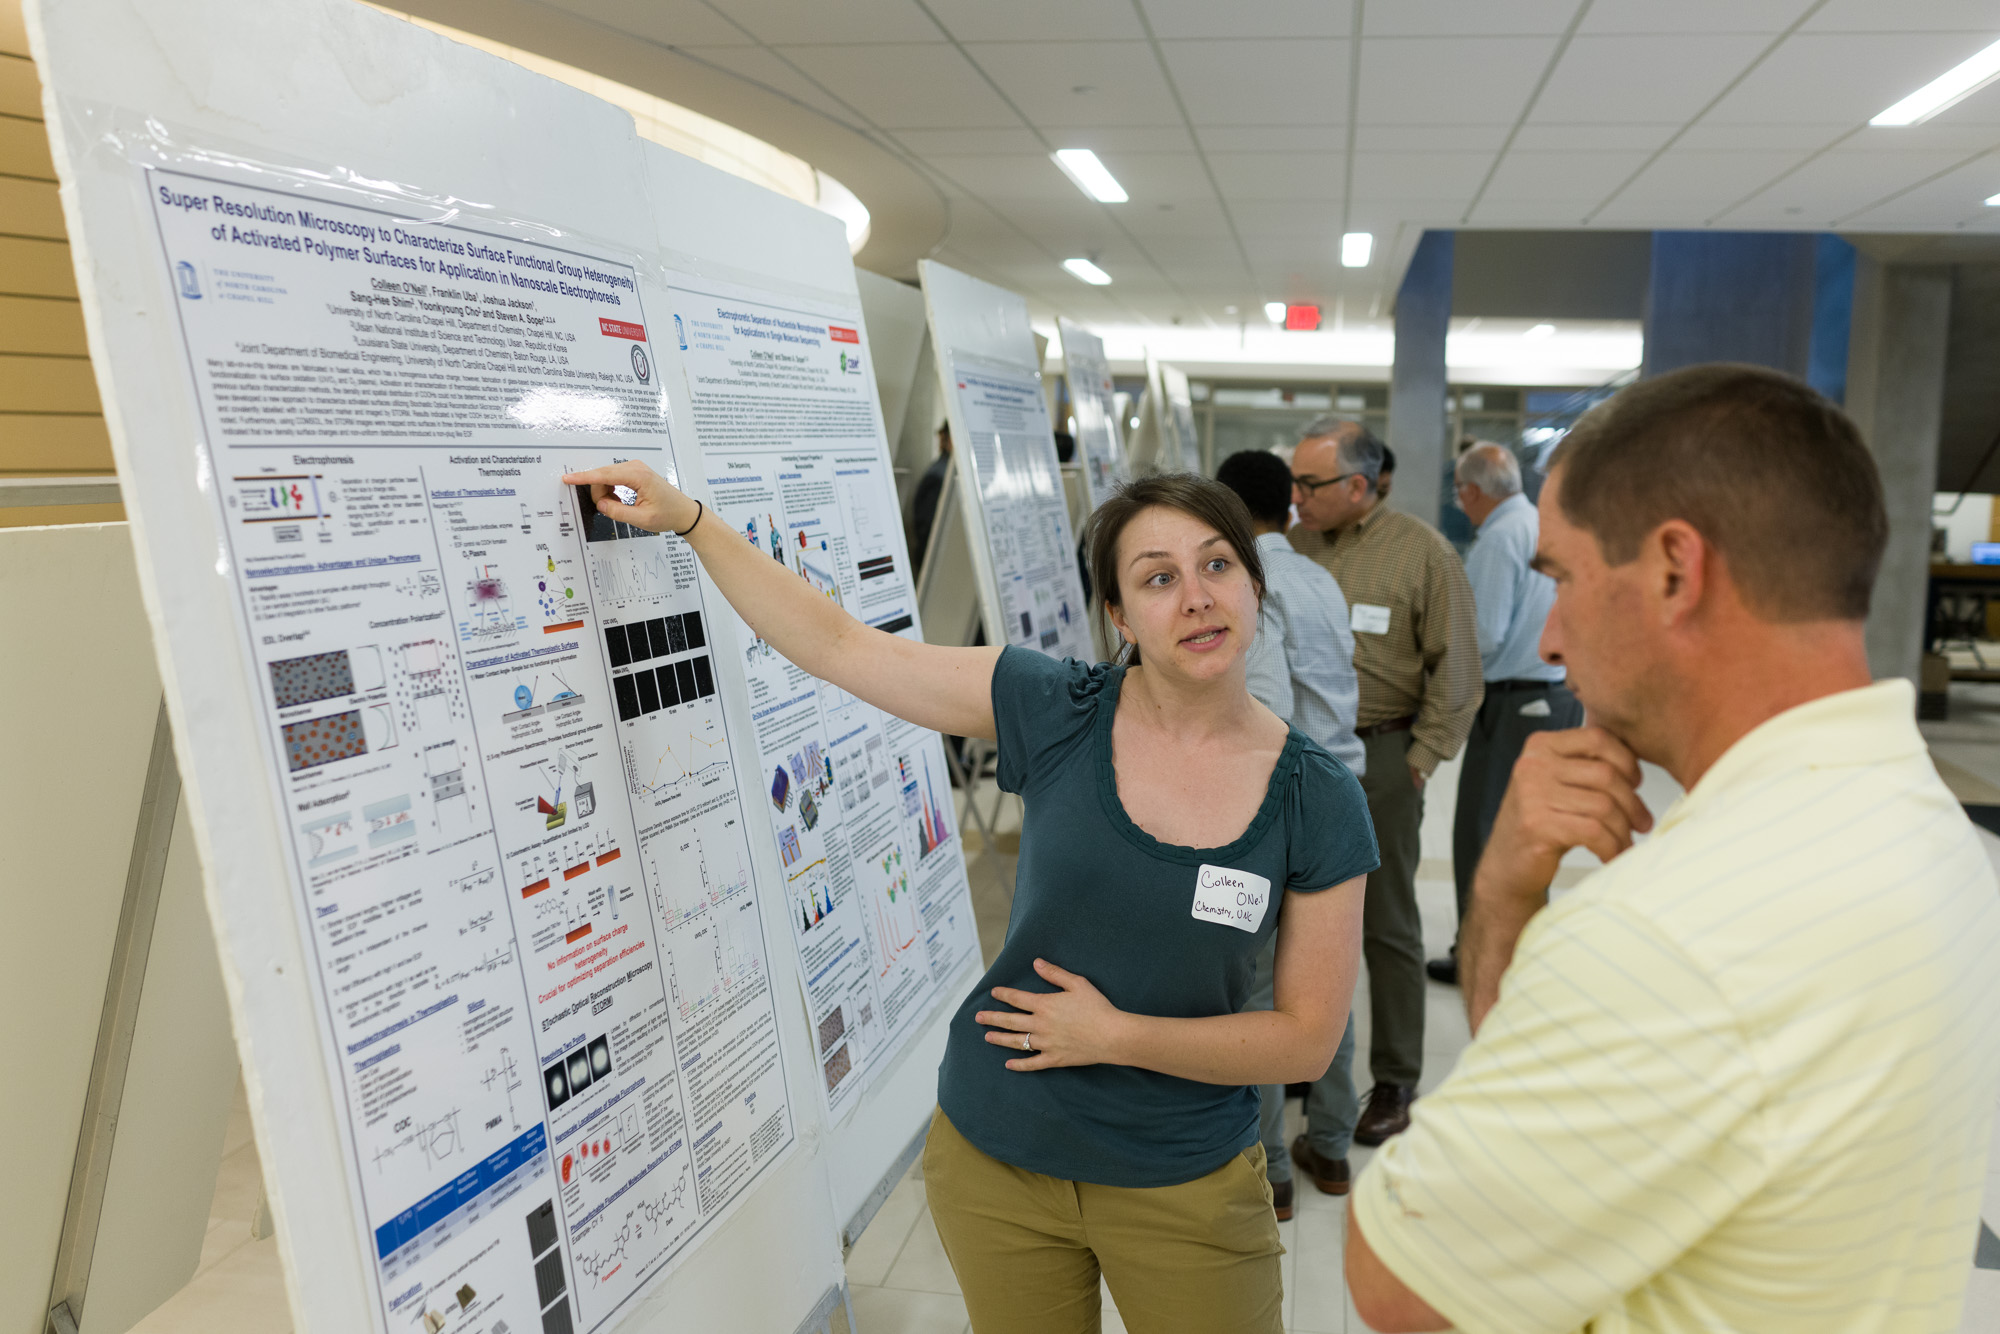 A woman with a nametag labeled 'Colleen' presents scientific data on a large poster, pointing to a section, while discussing with a man in a striped shirt. The backdrop features other attendees observing similar posters.